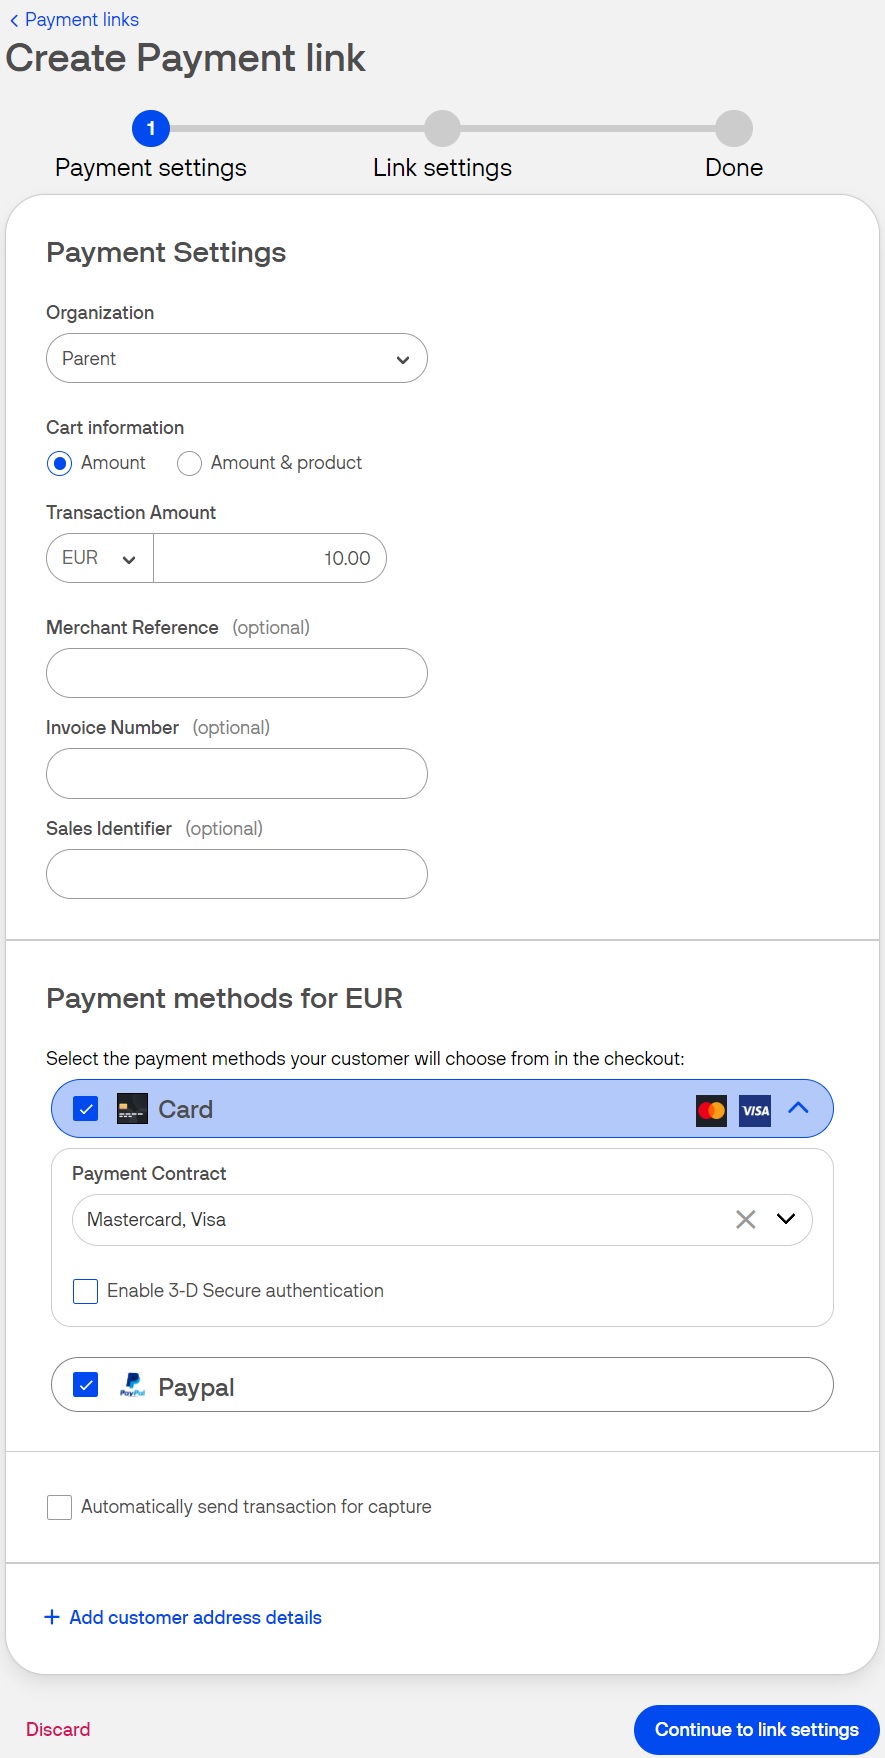 Payment settings screen